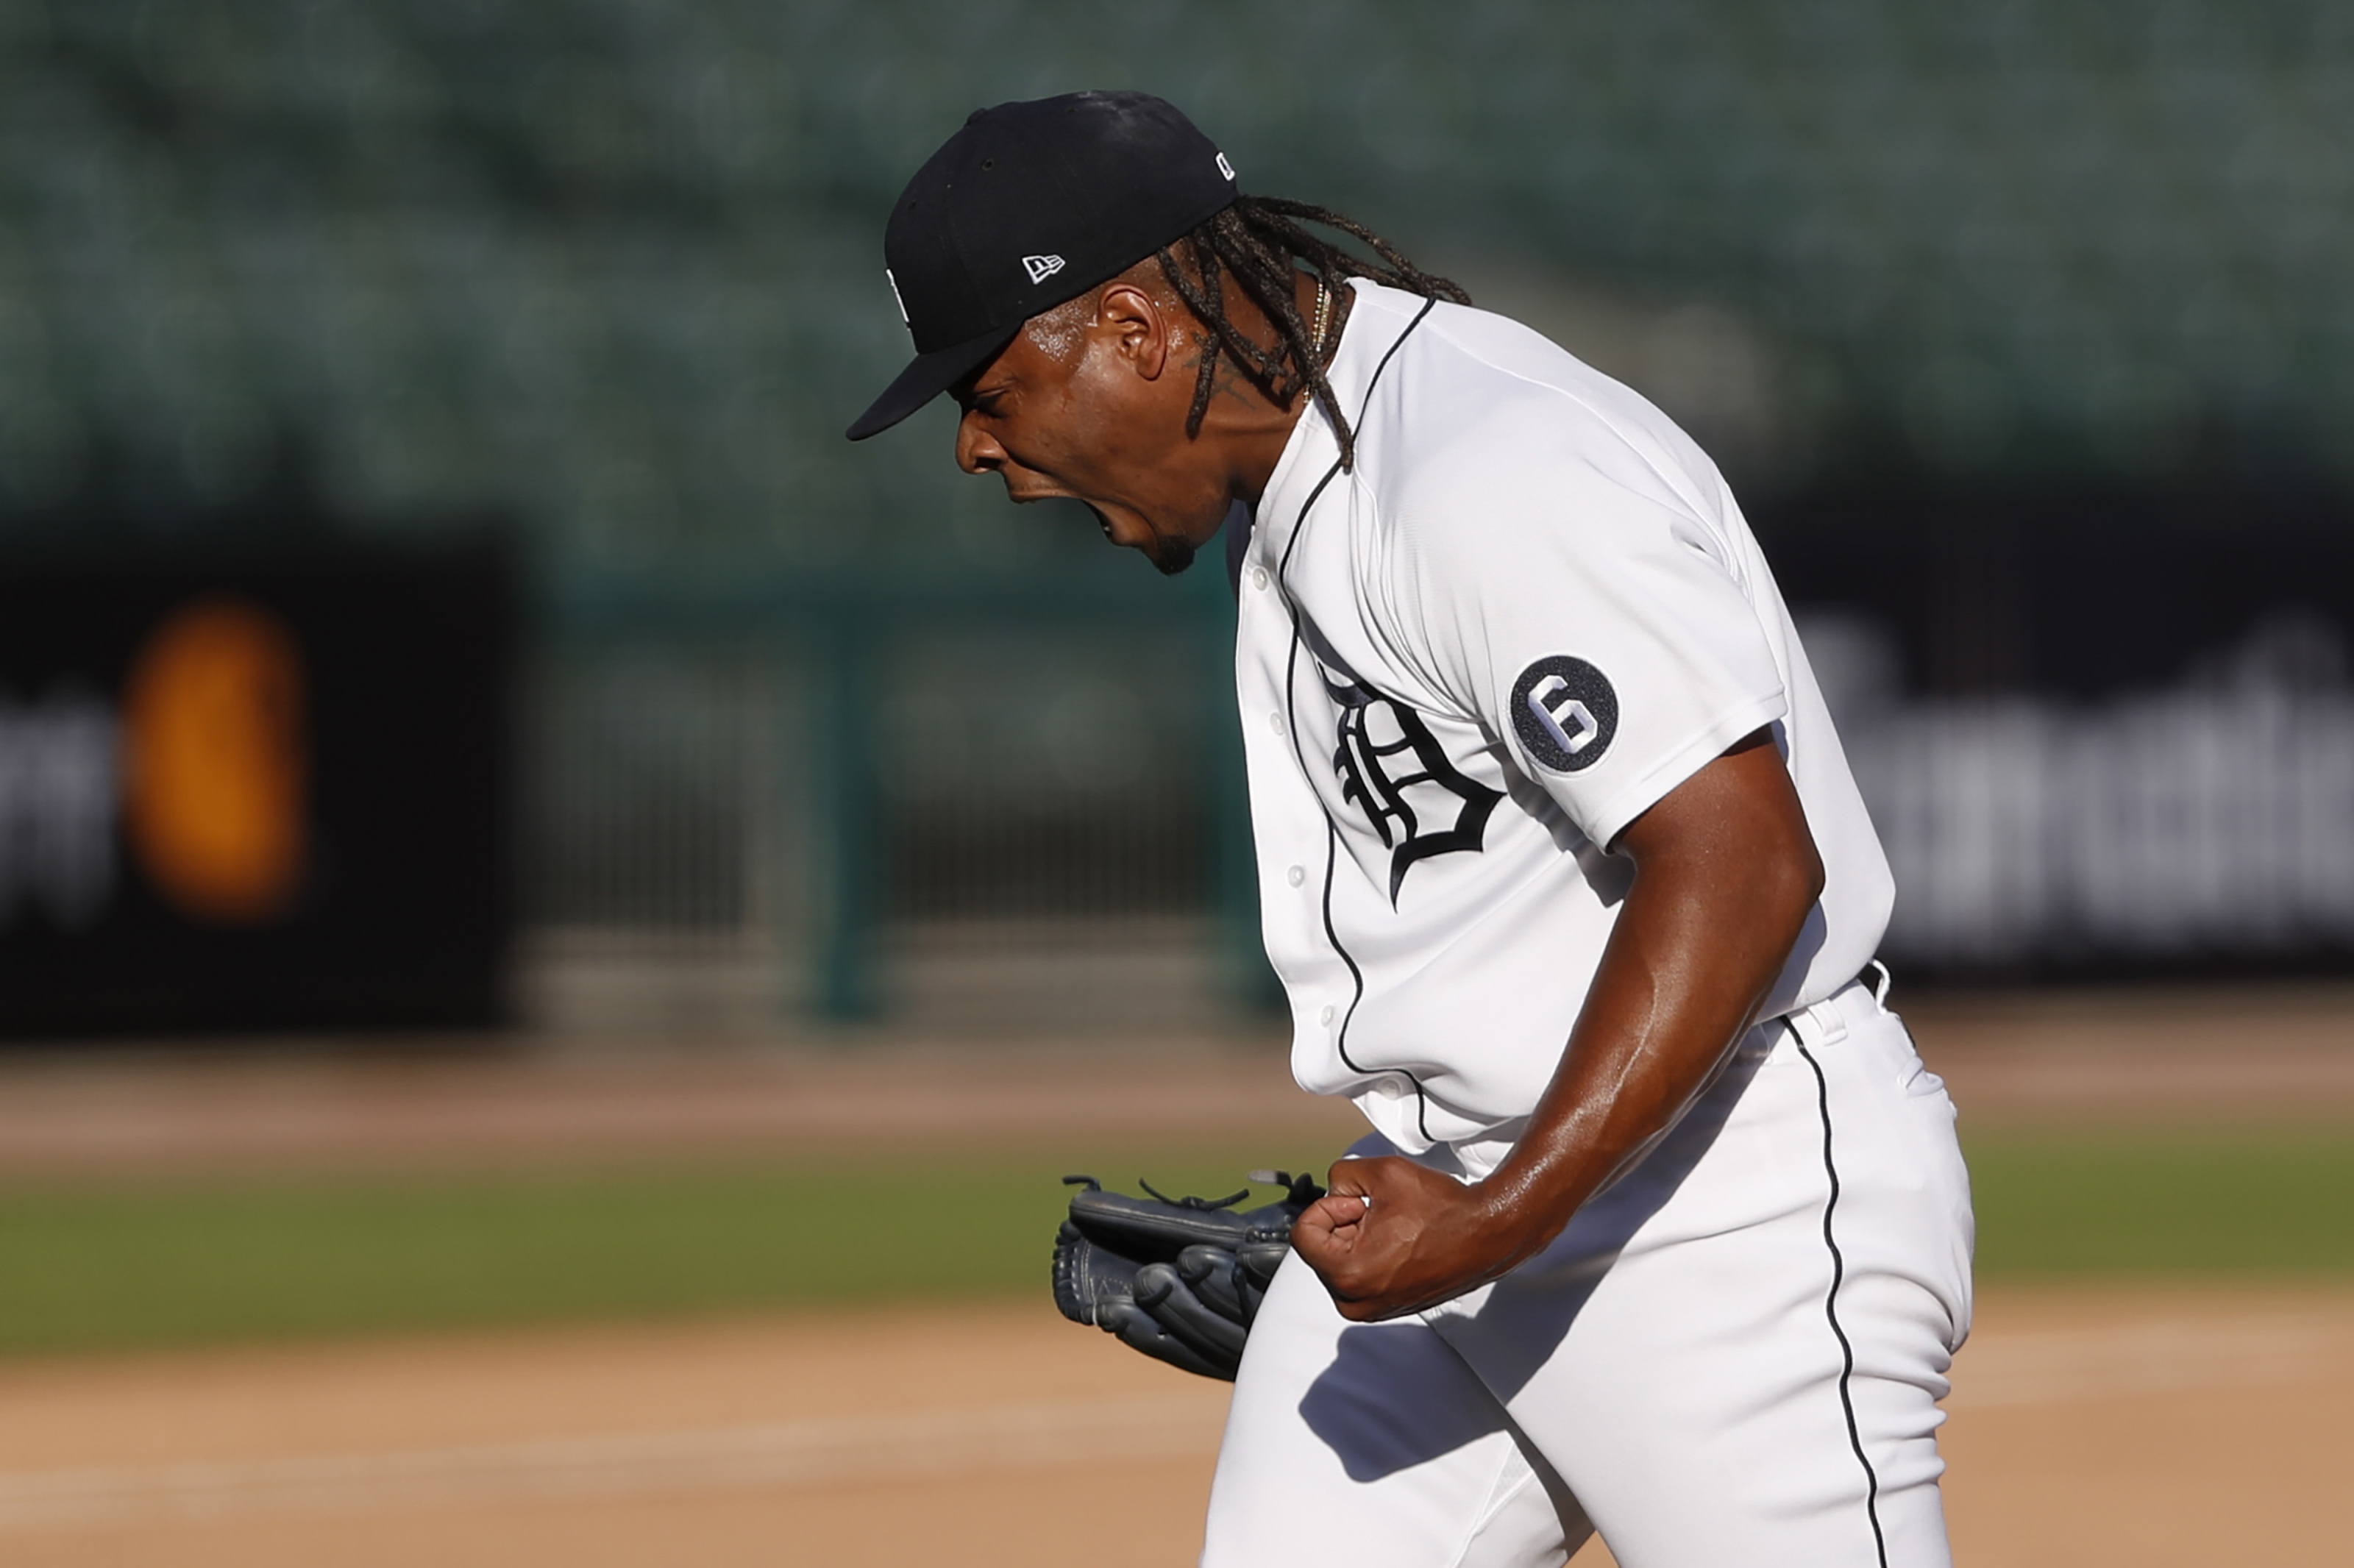 Detroit Tigers: Gregory Soto aiming for closer role in 2021